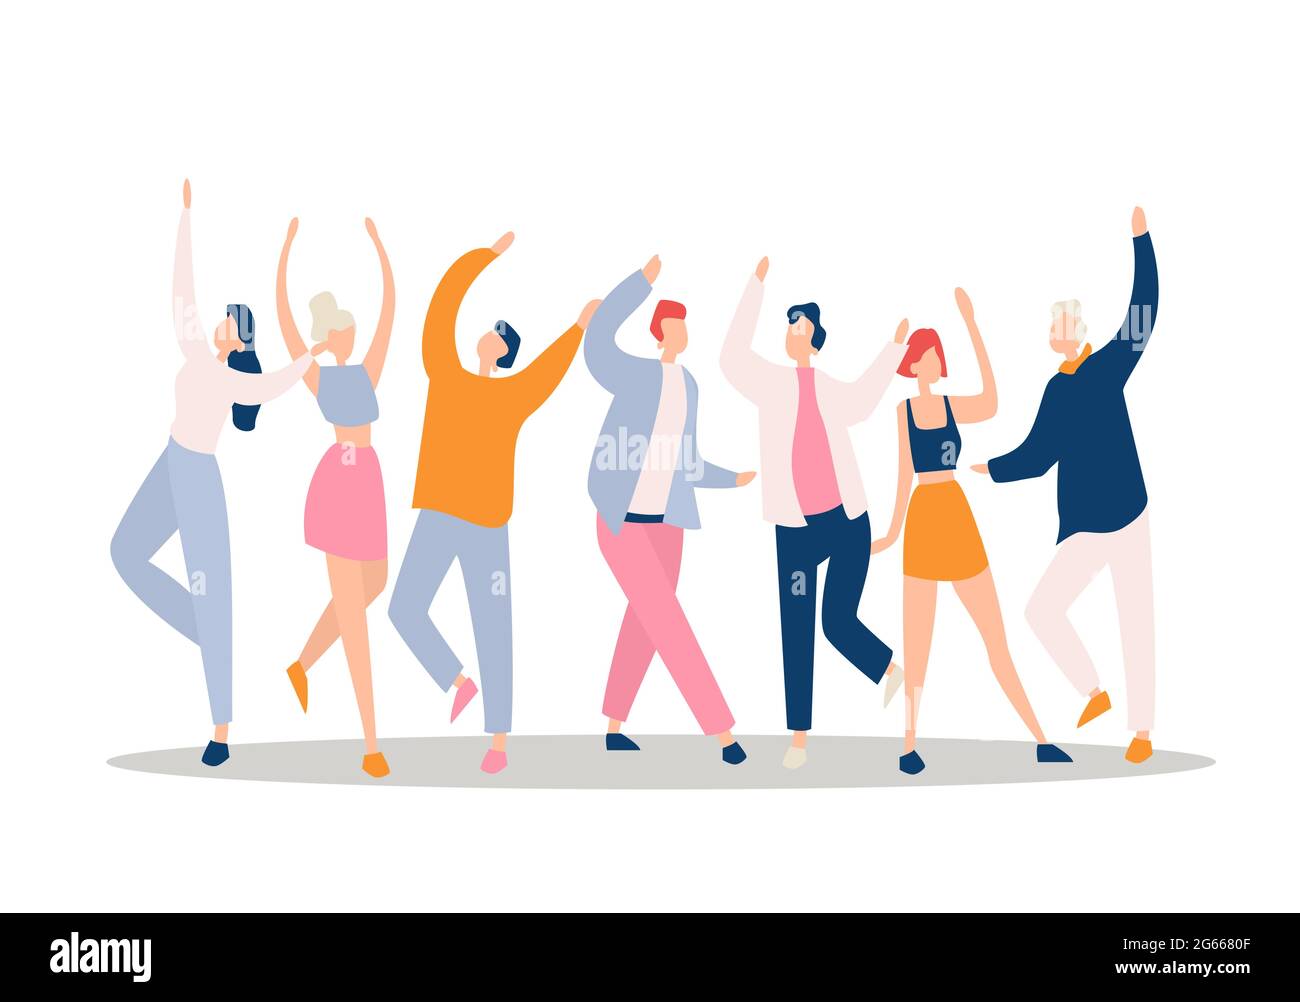 Dance party flat vector illustration. Night club, holiday, active leisure, recreation. Dancers raising hands, young people group dancing together Stock Vector